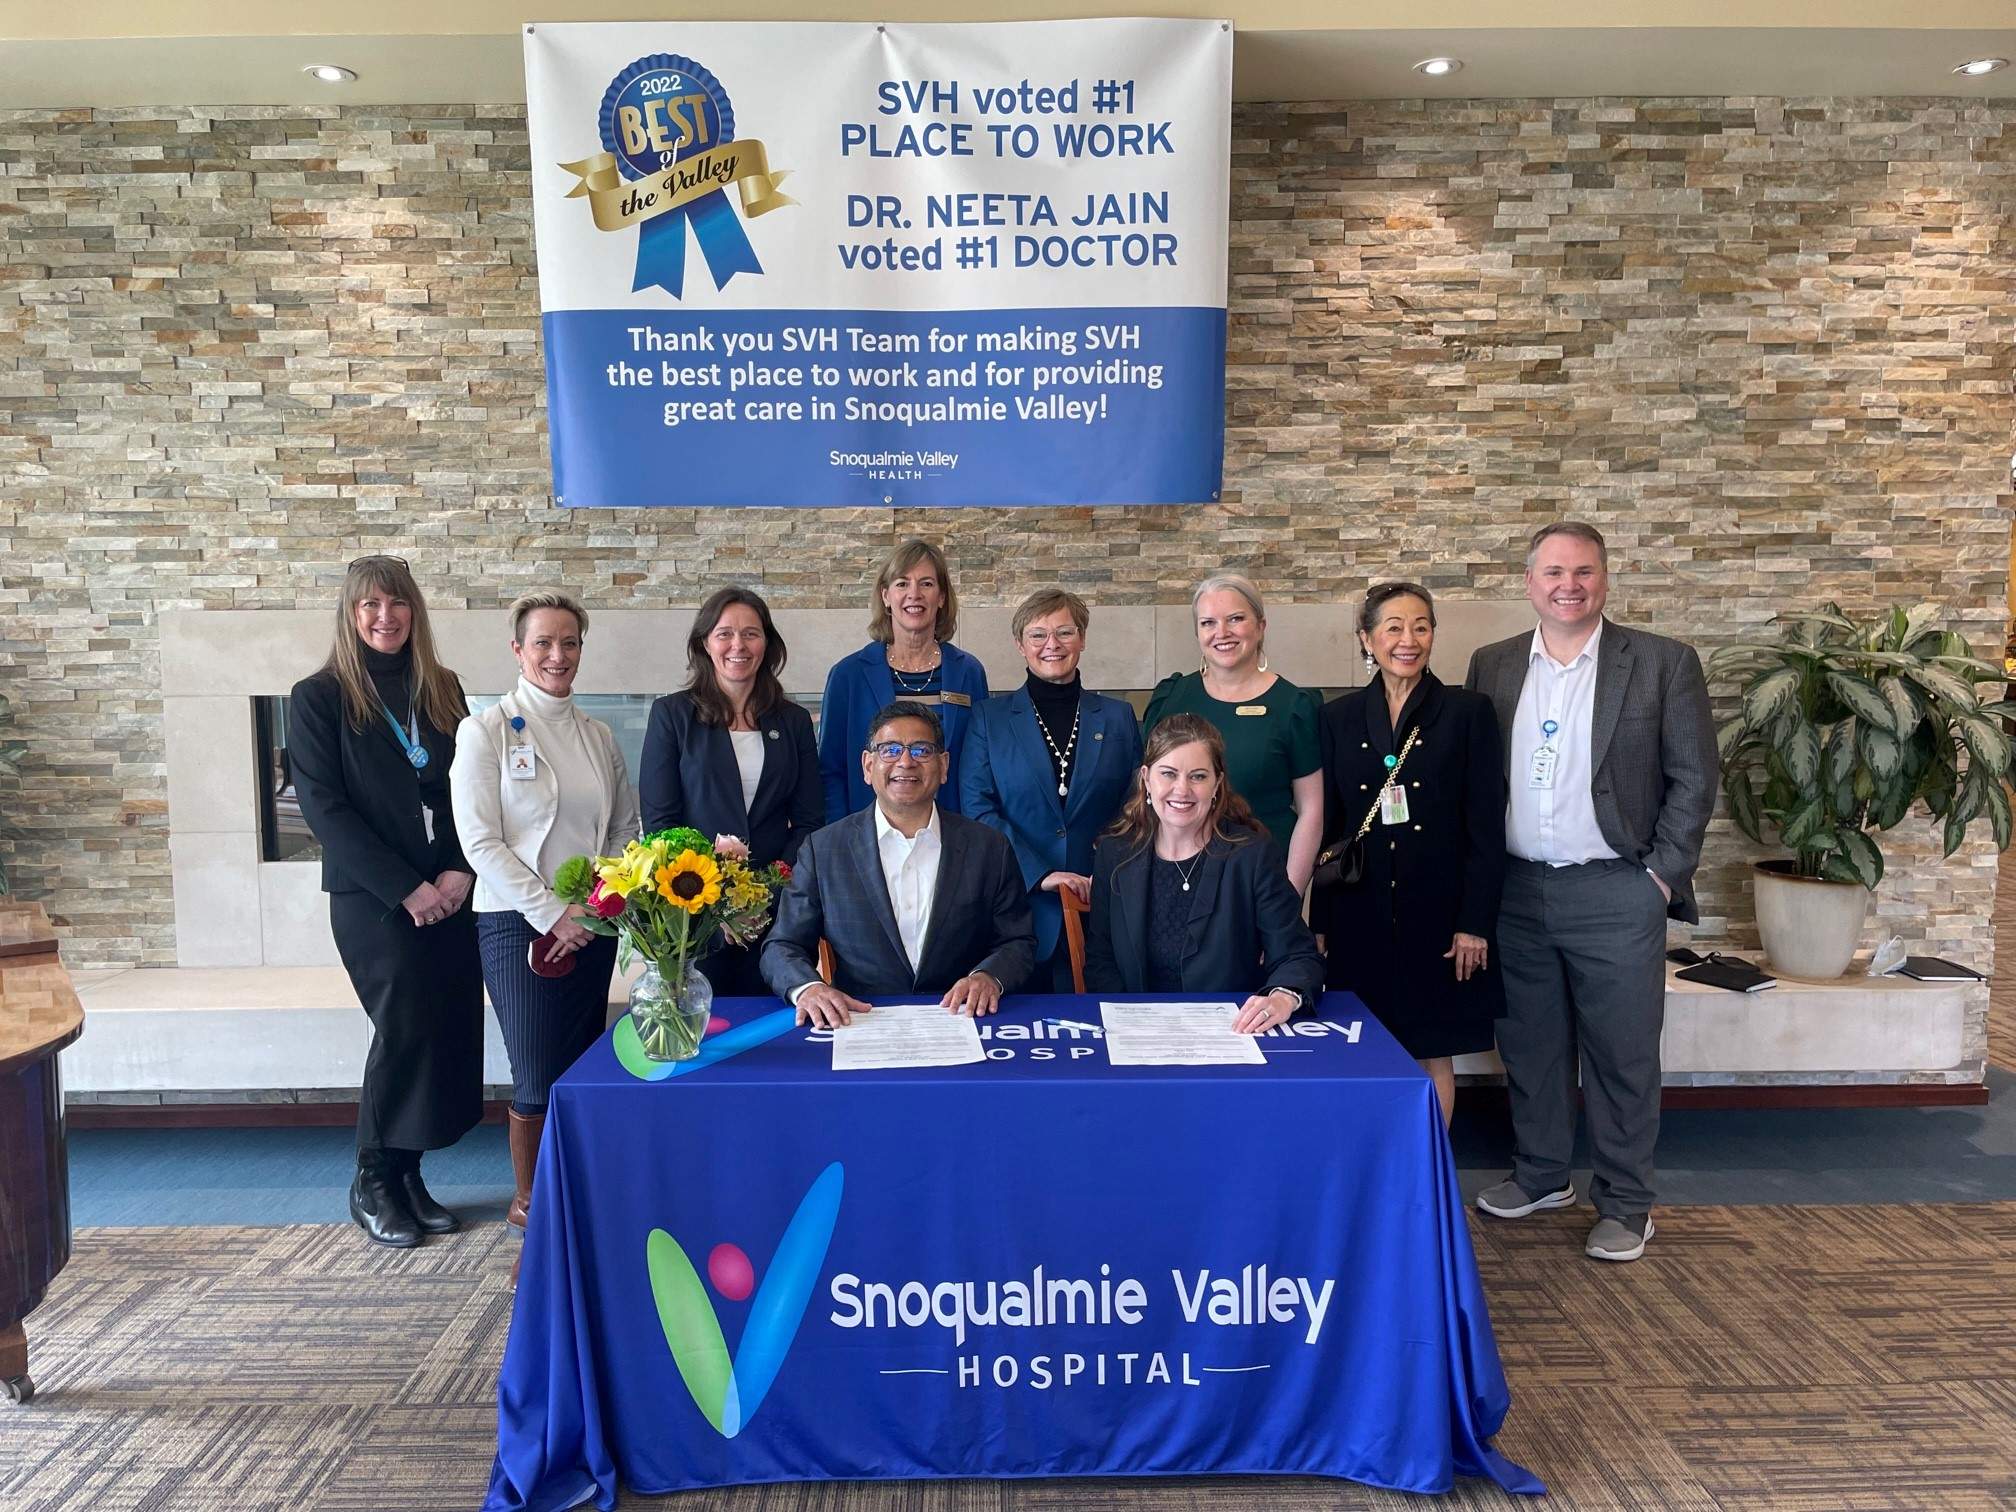 Spacelabs-Snoqualmie Valley Health partnership